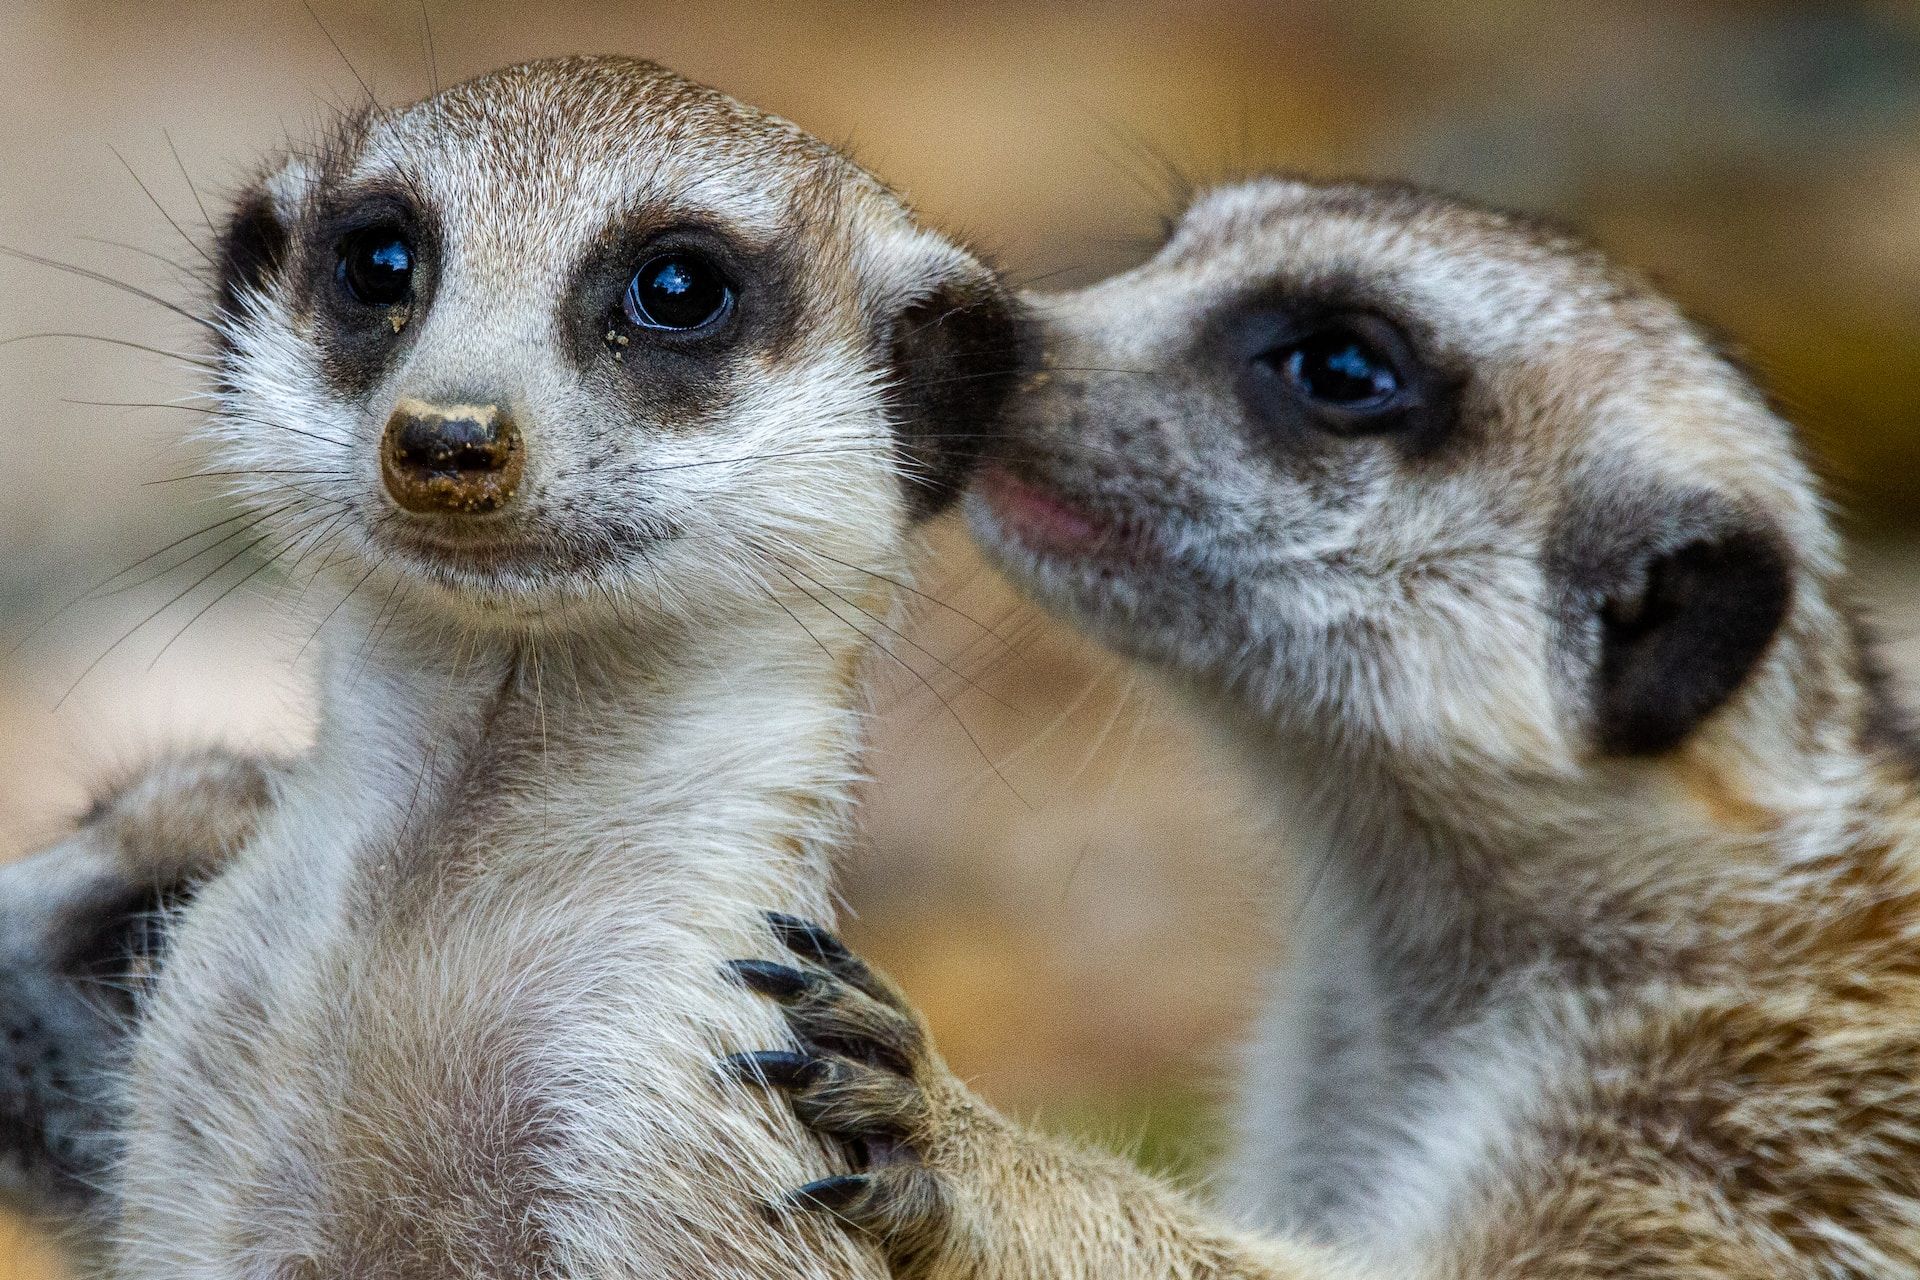 a meerkat whispering into another's ear